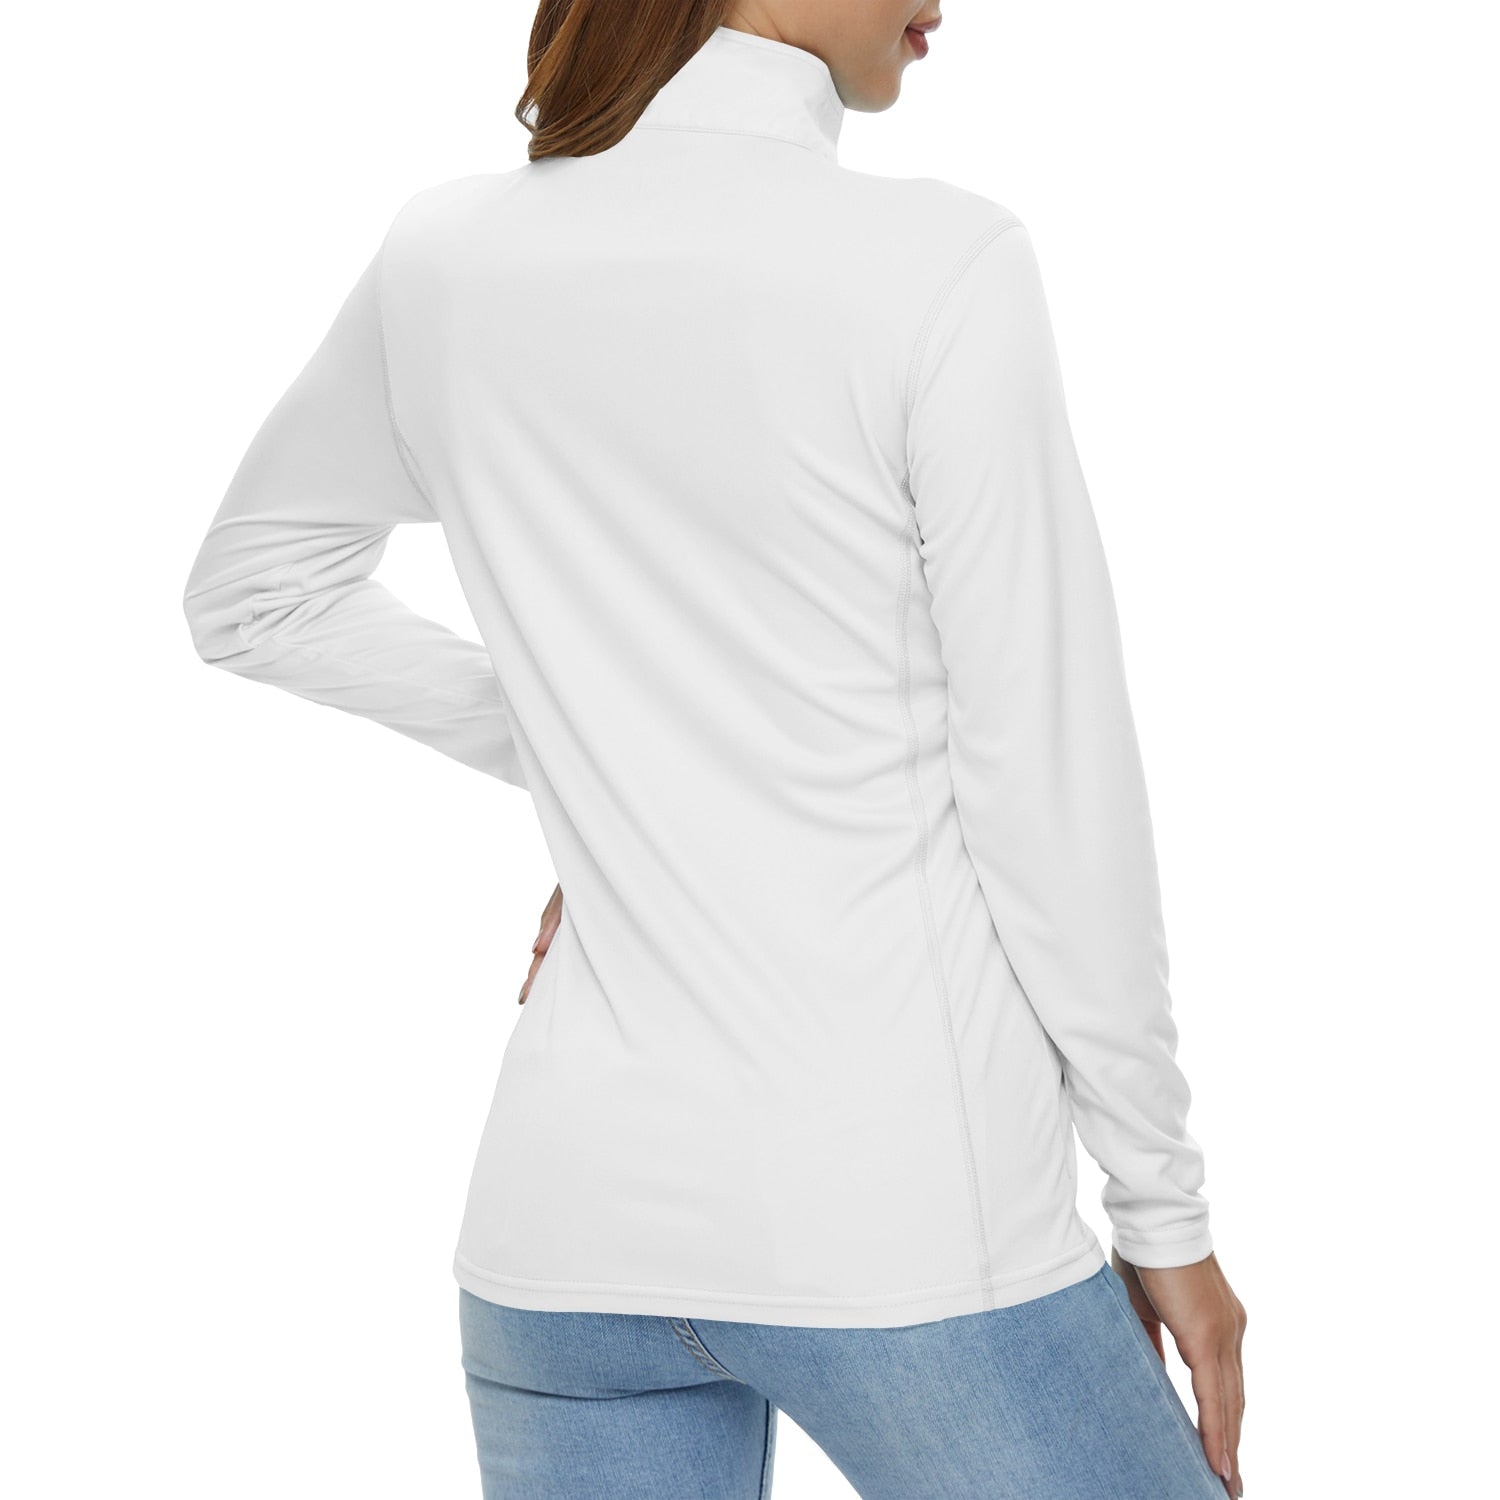 Female model with her back turned wearing a white long sleeve sun protection top. The lady has brown hair and is also wearing light blue jeans.